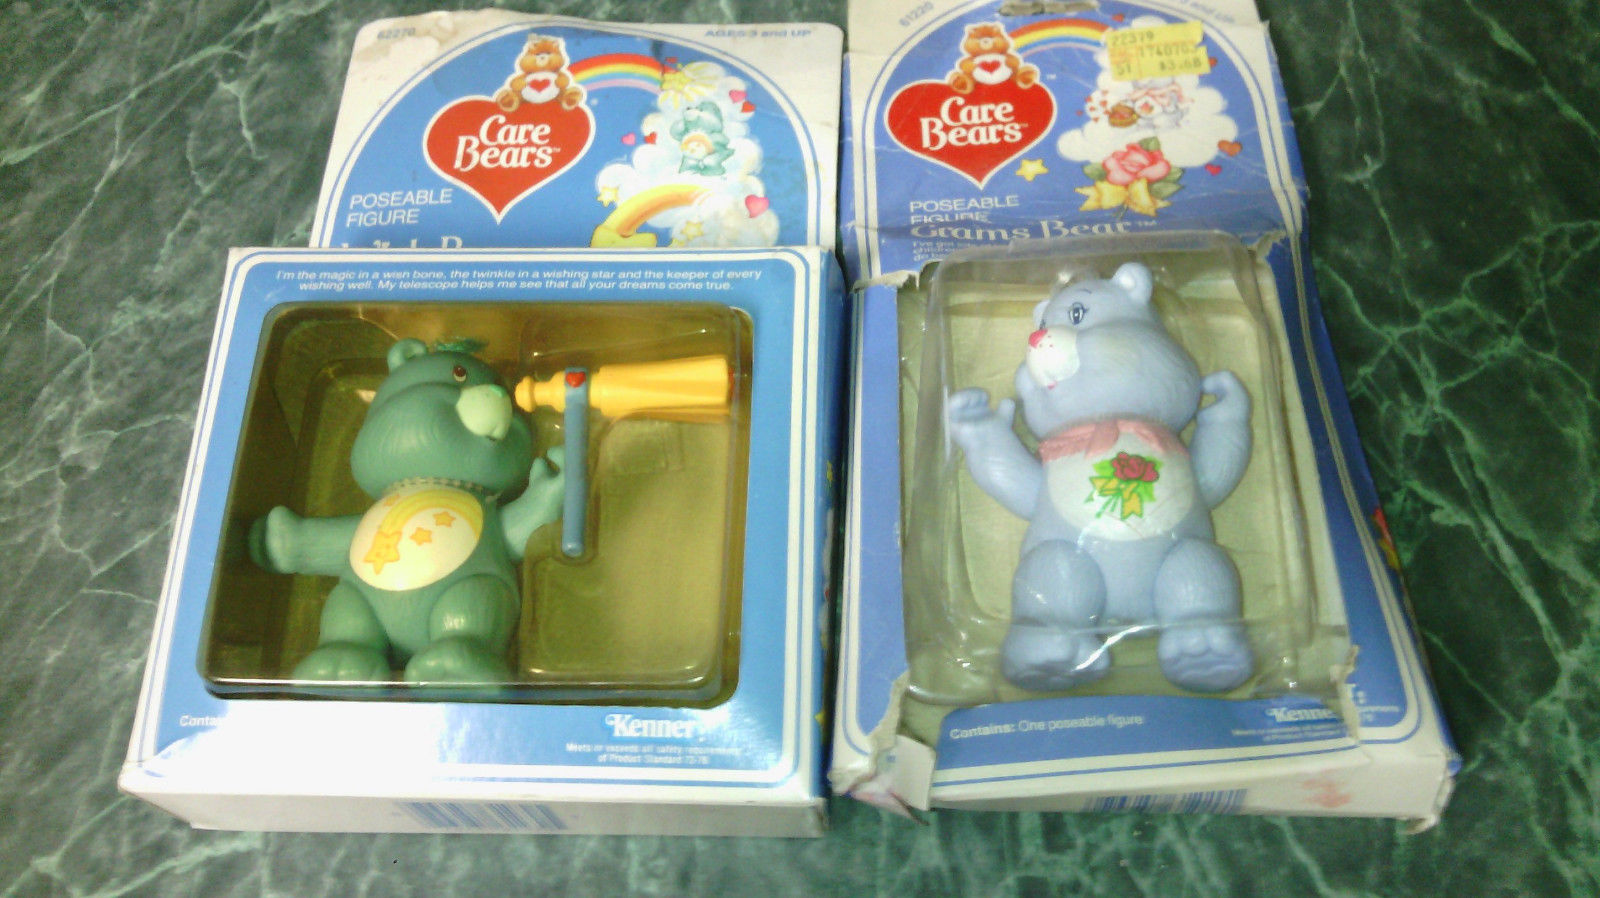 Care Bears Poseable Grams and Wish bear Figures in Original Boxes Kenner 1984 